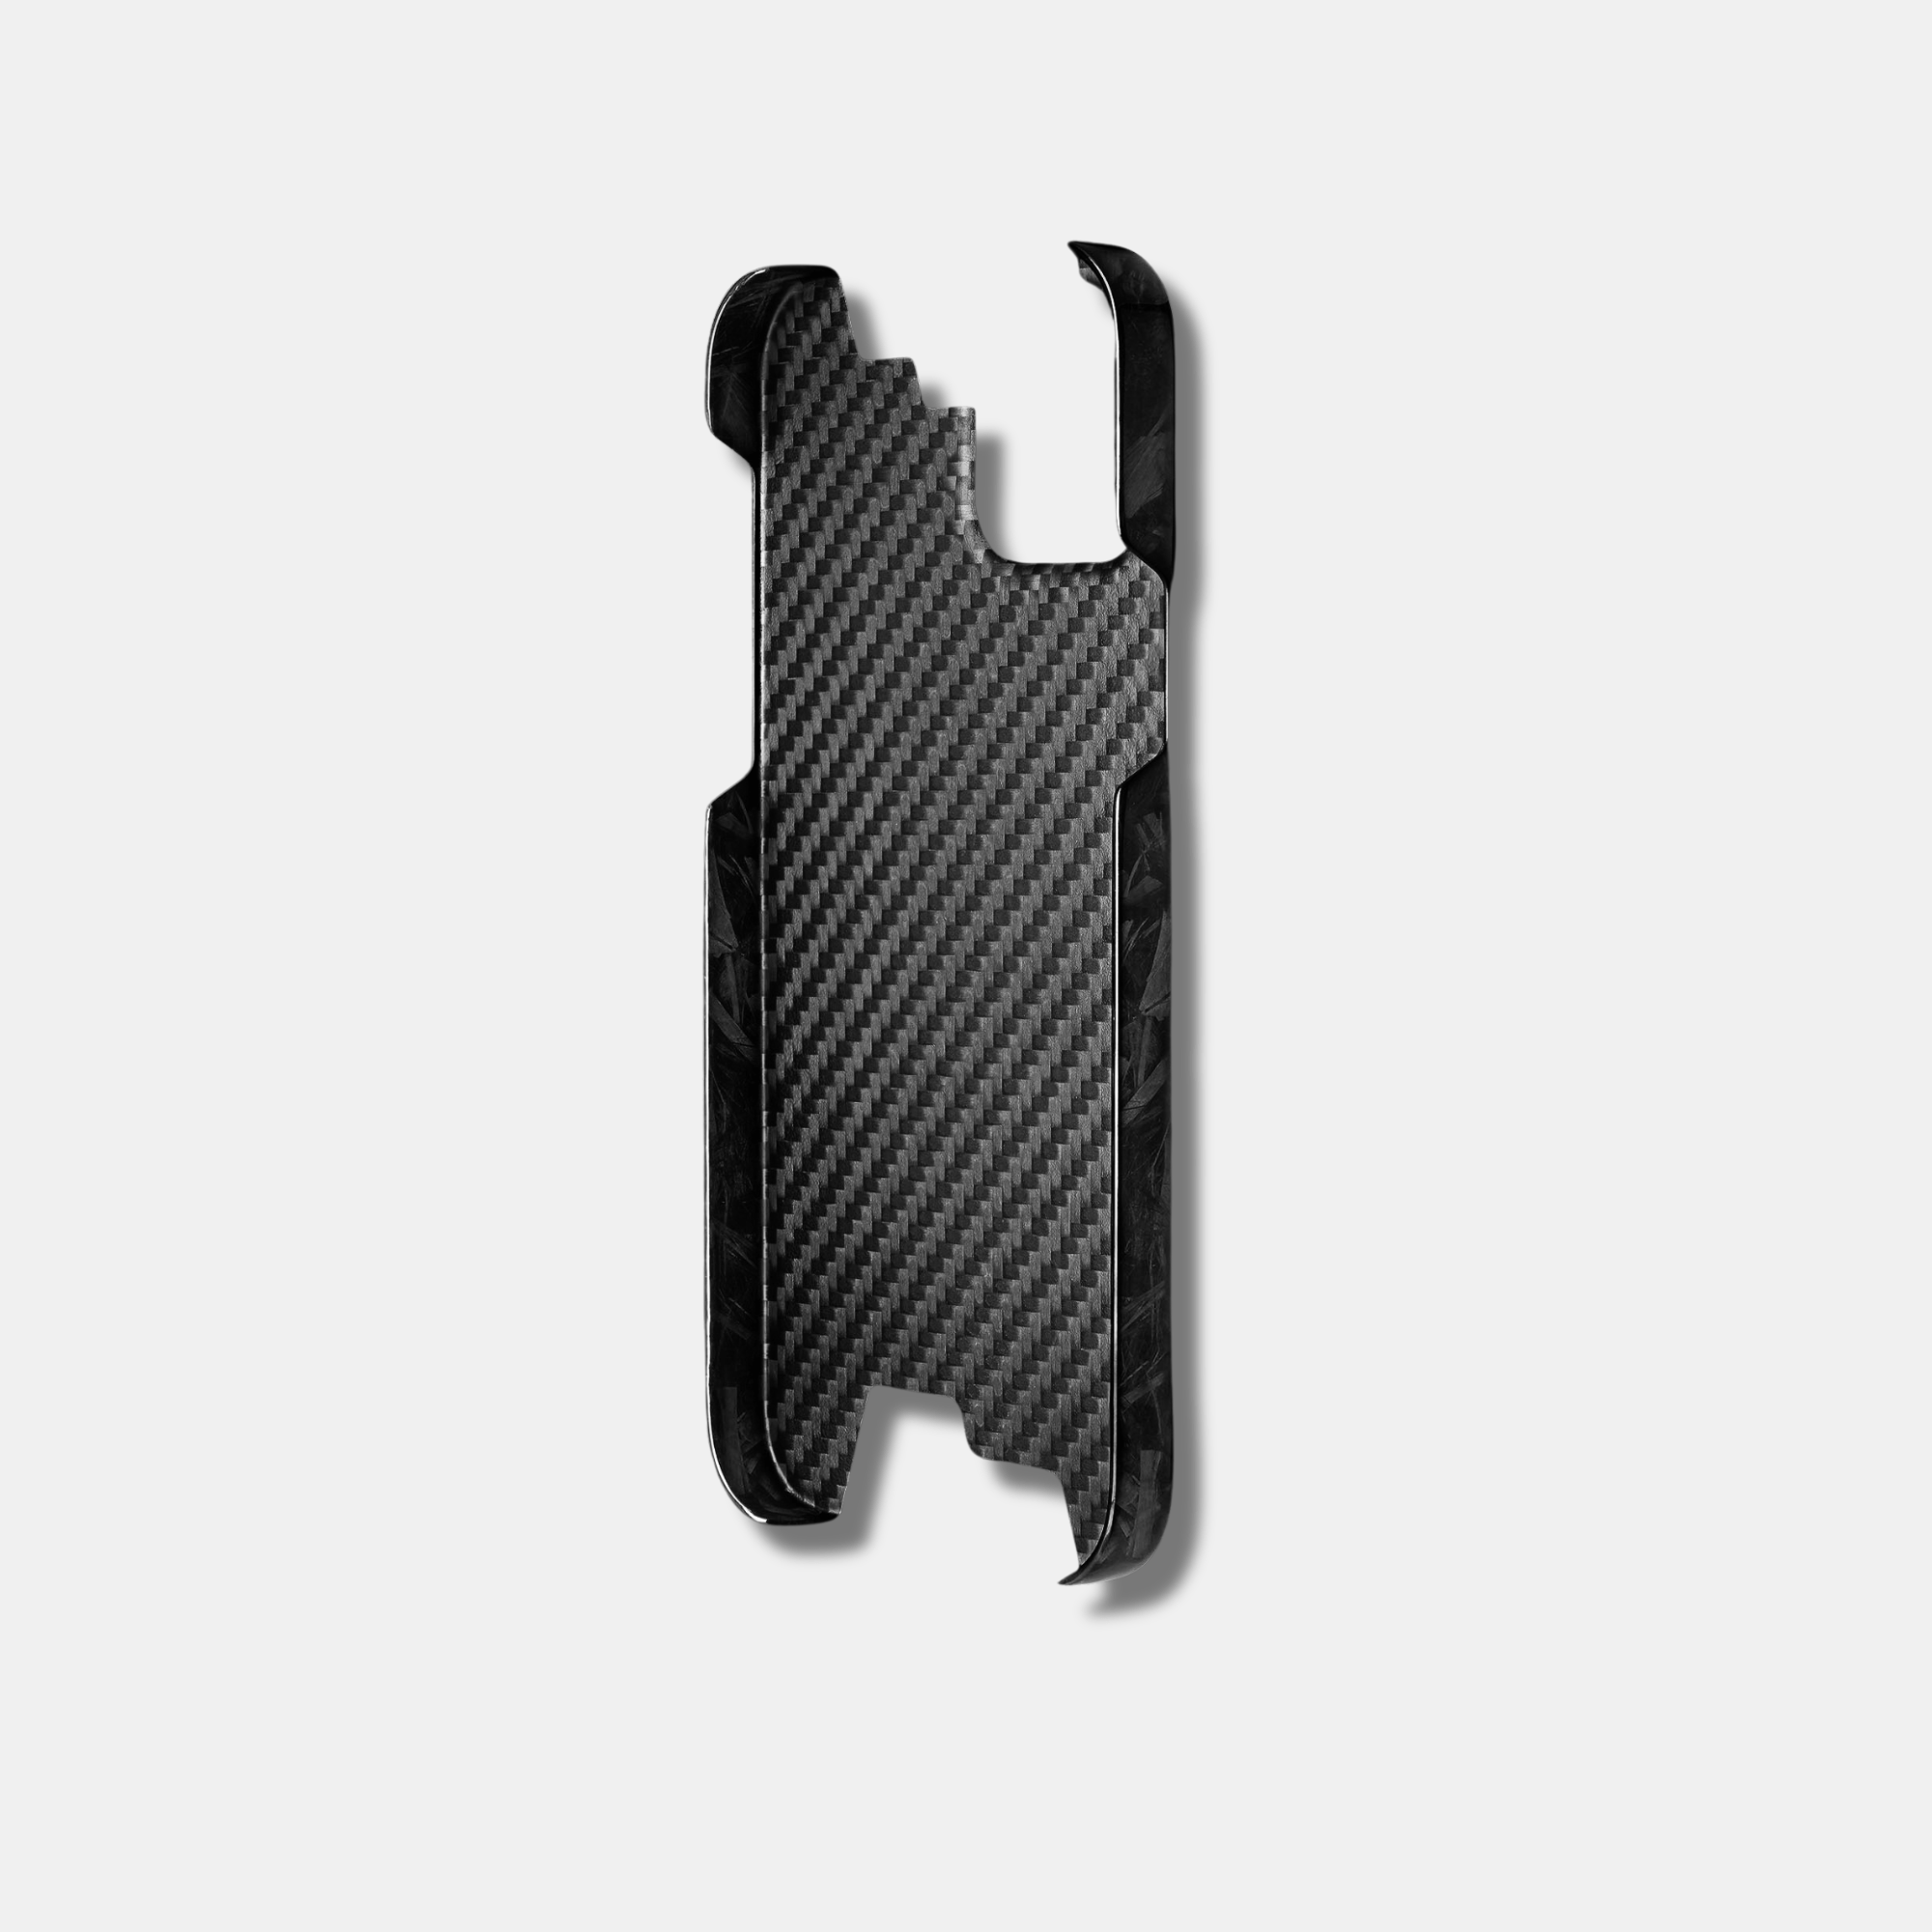 Limited Forged Carbon iPhone Concept Case - CRBNCNCPT